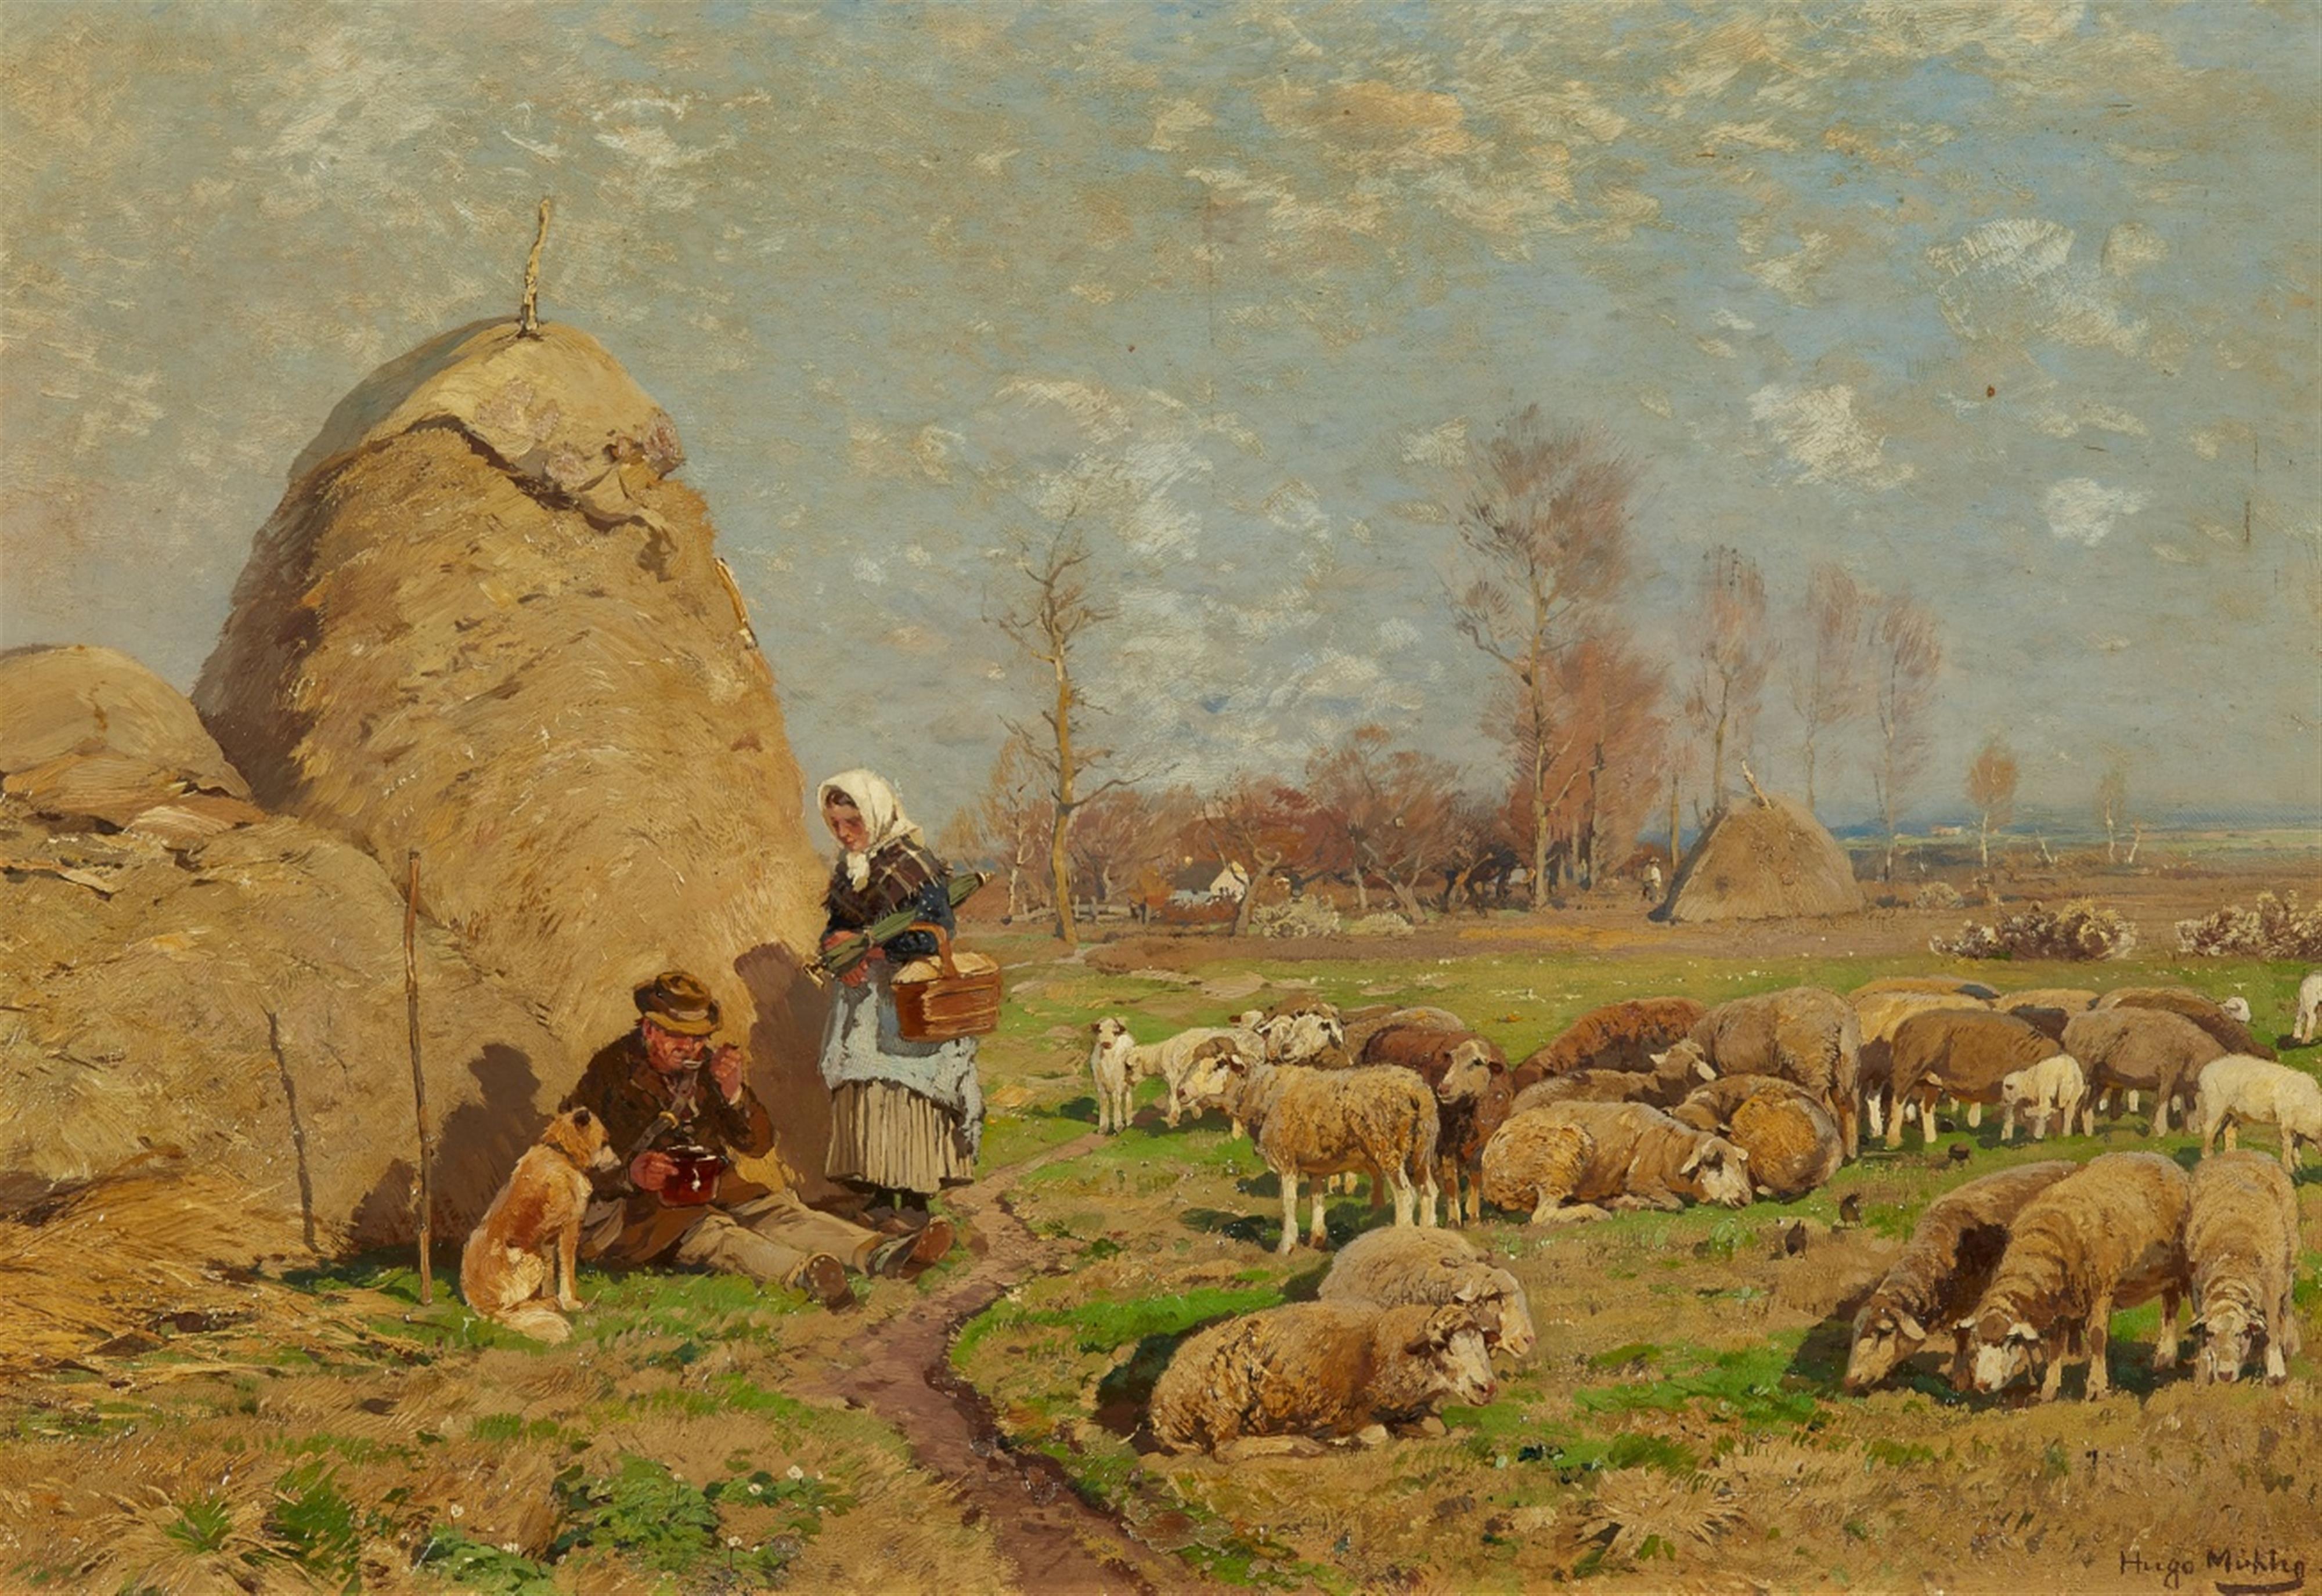 Hugo Mühlig - Summer Landscape with a Peasant Couple and Sheep - image-1